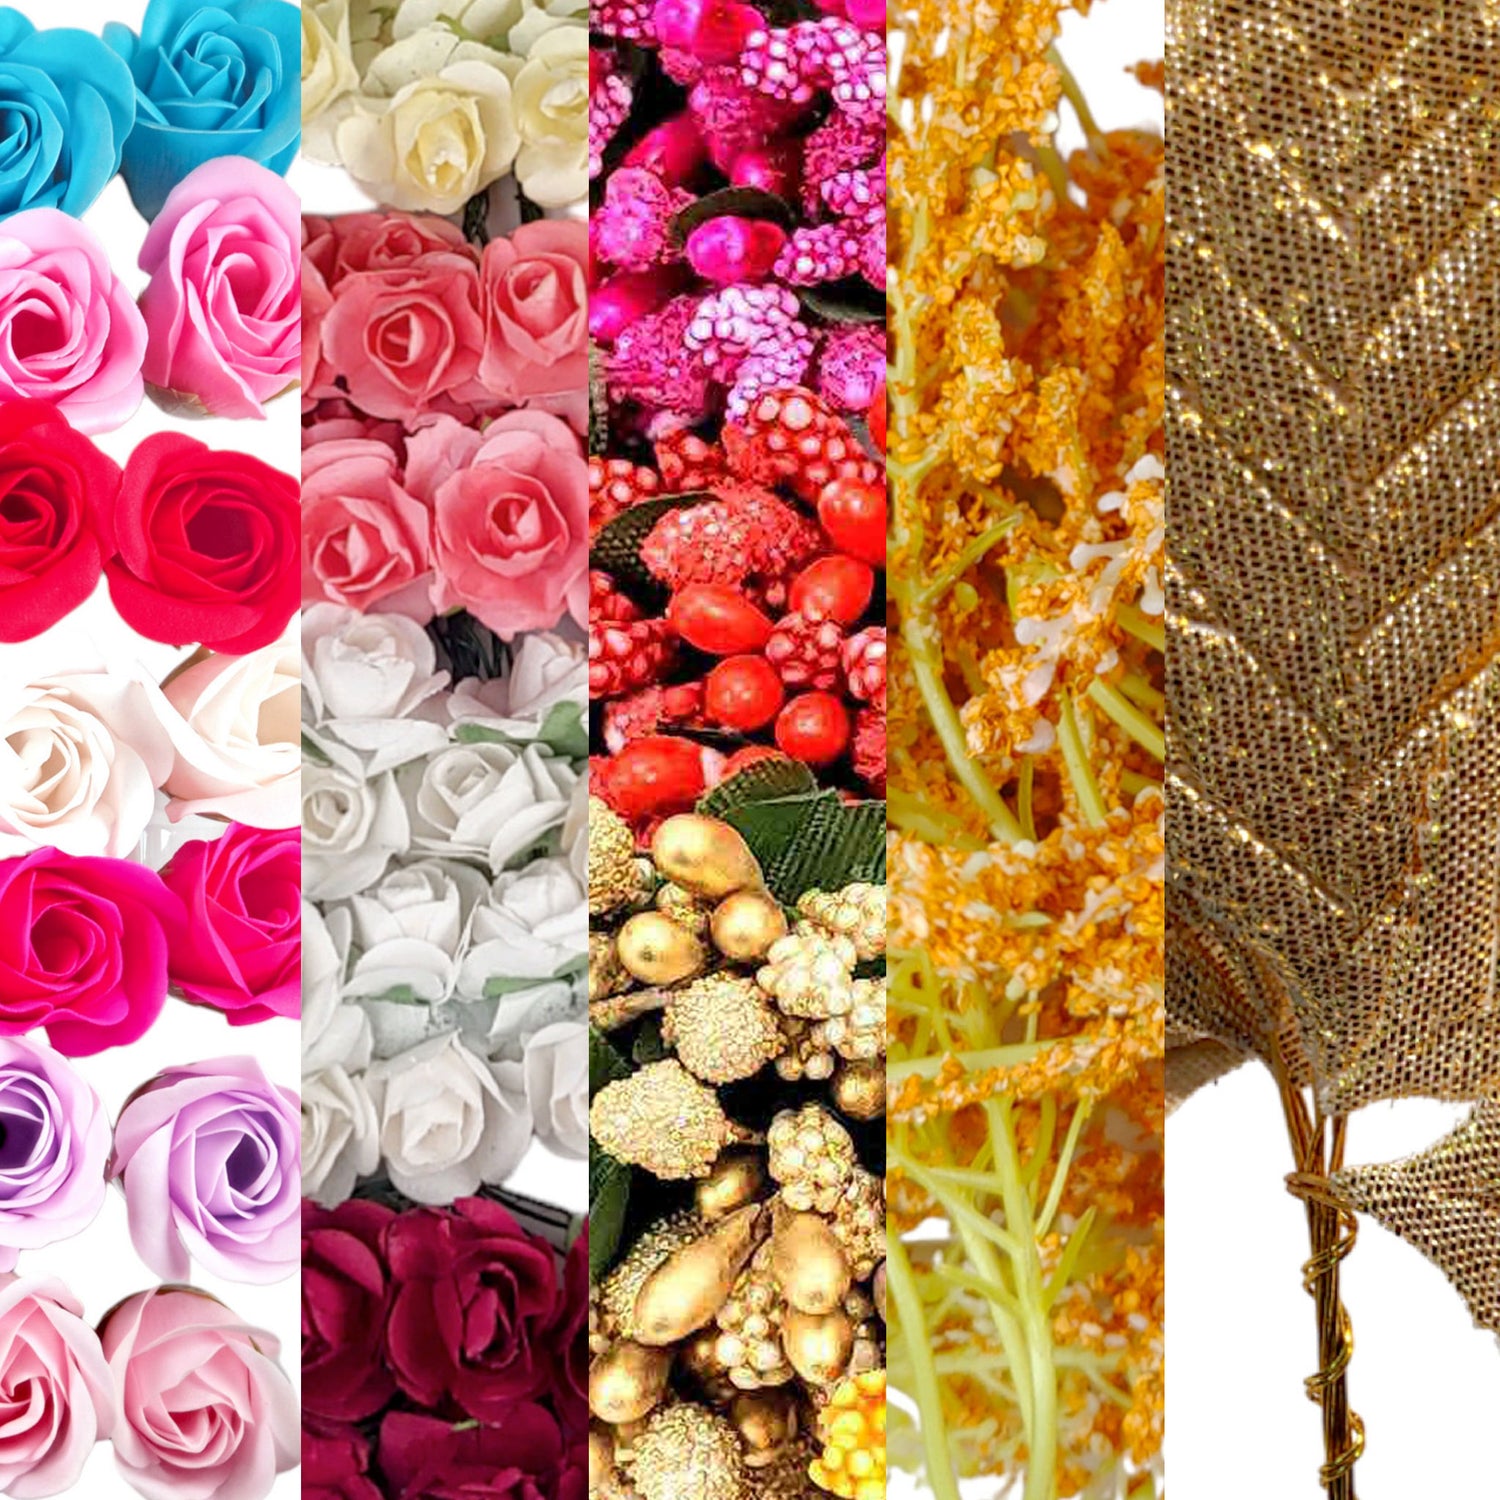 Craft Flowers, Pollen Buds, Leaves, and Sticks: Artisanal Beauty by Indian Petals